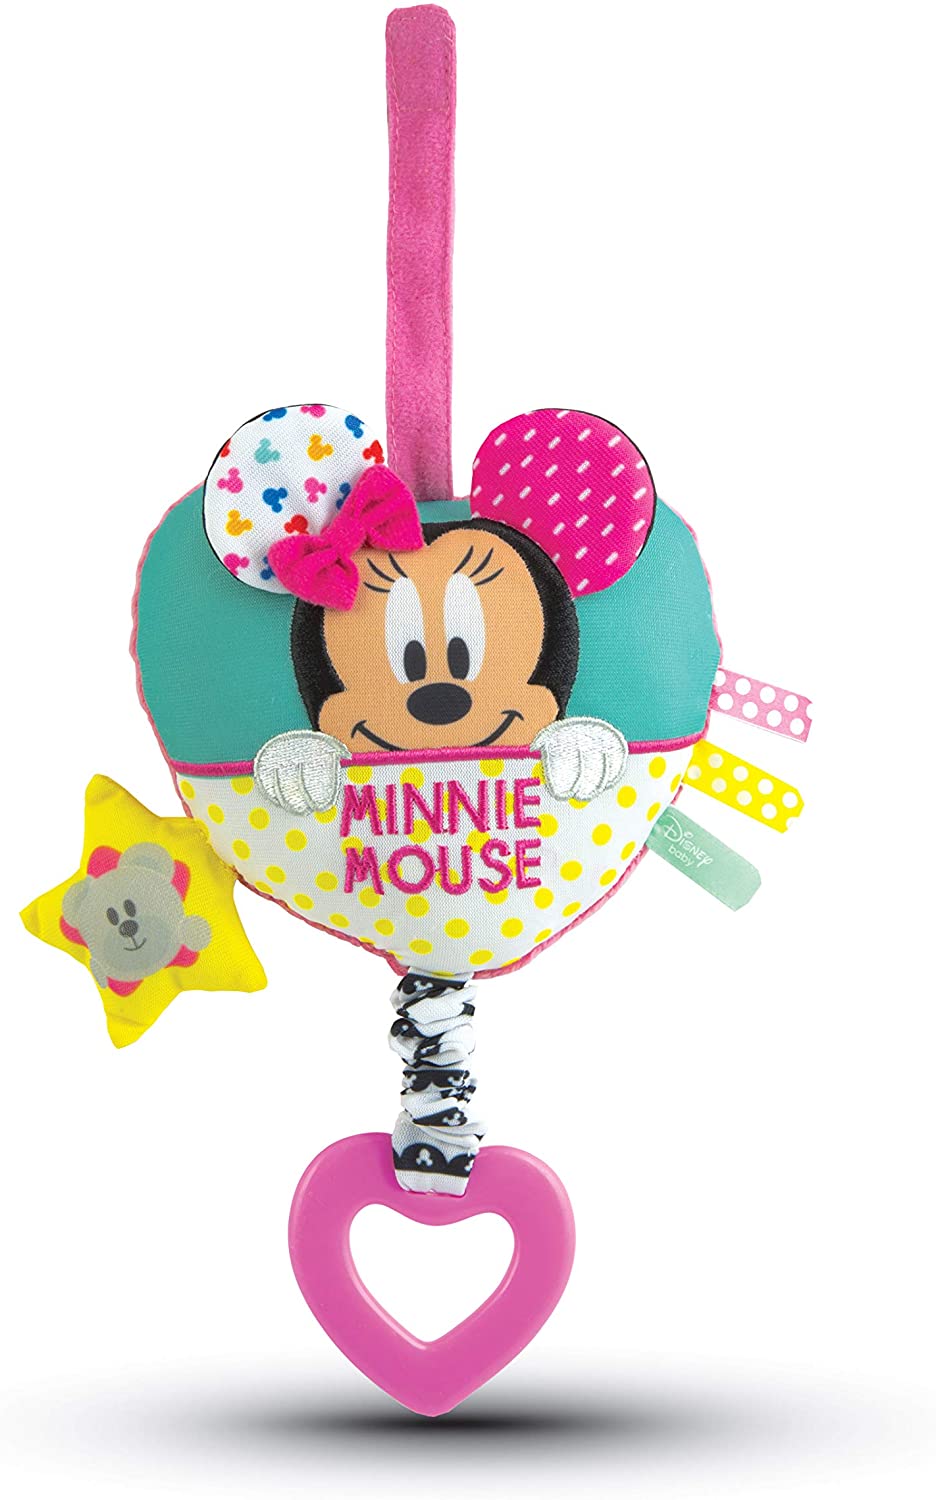 Baby Clementoni - Baby Minnie Soft Musical Toy